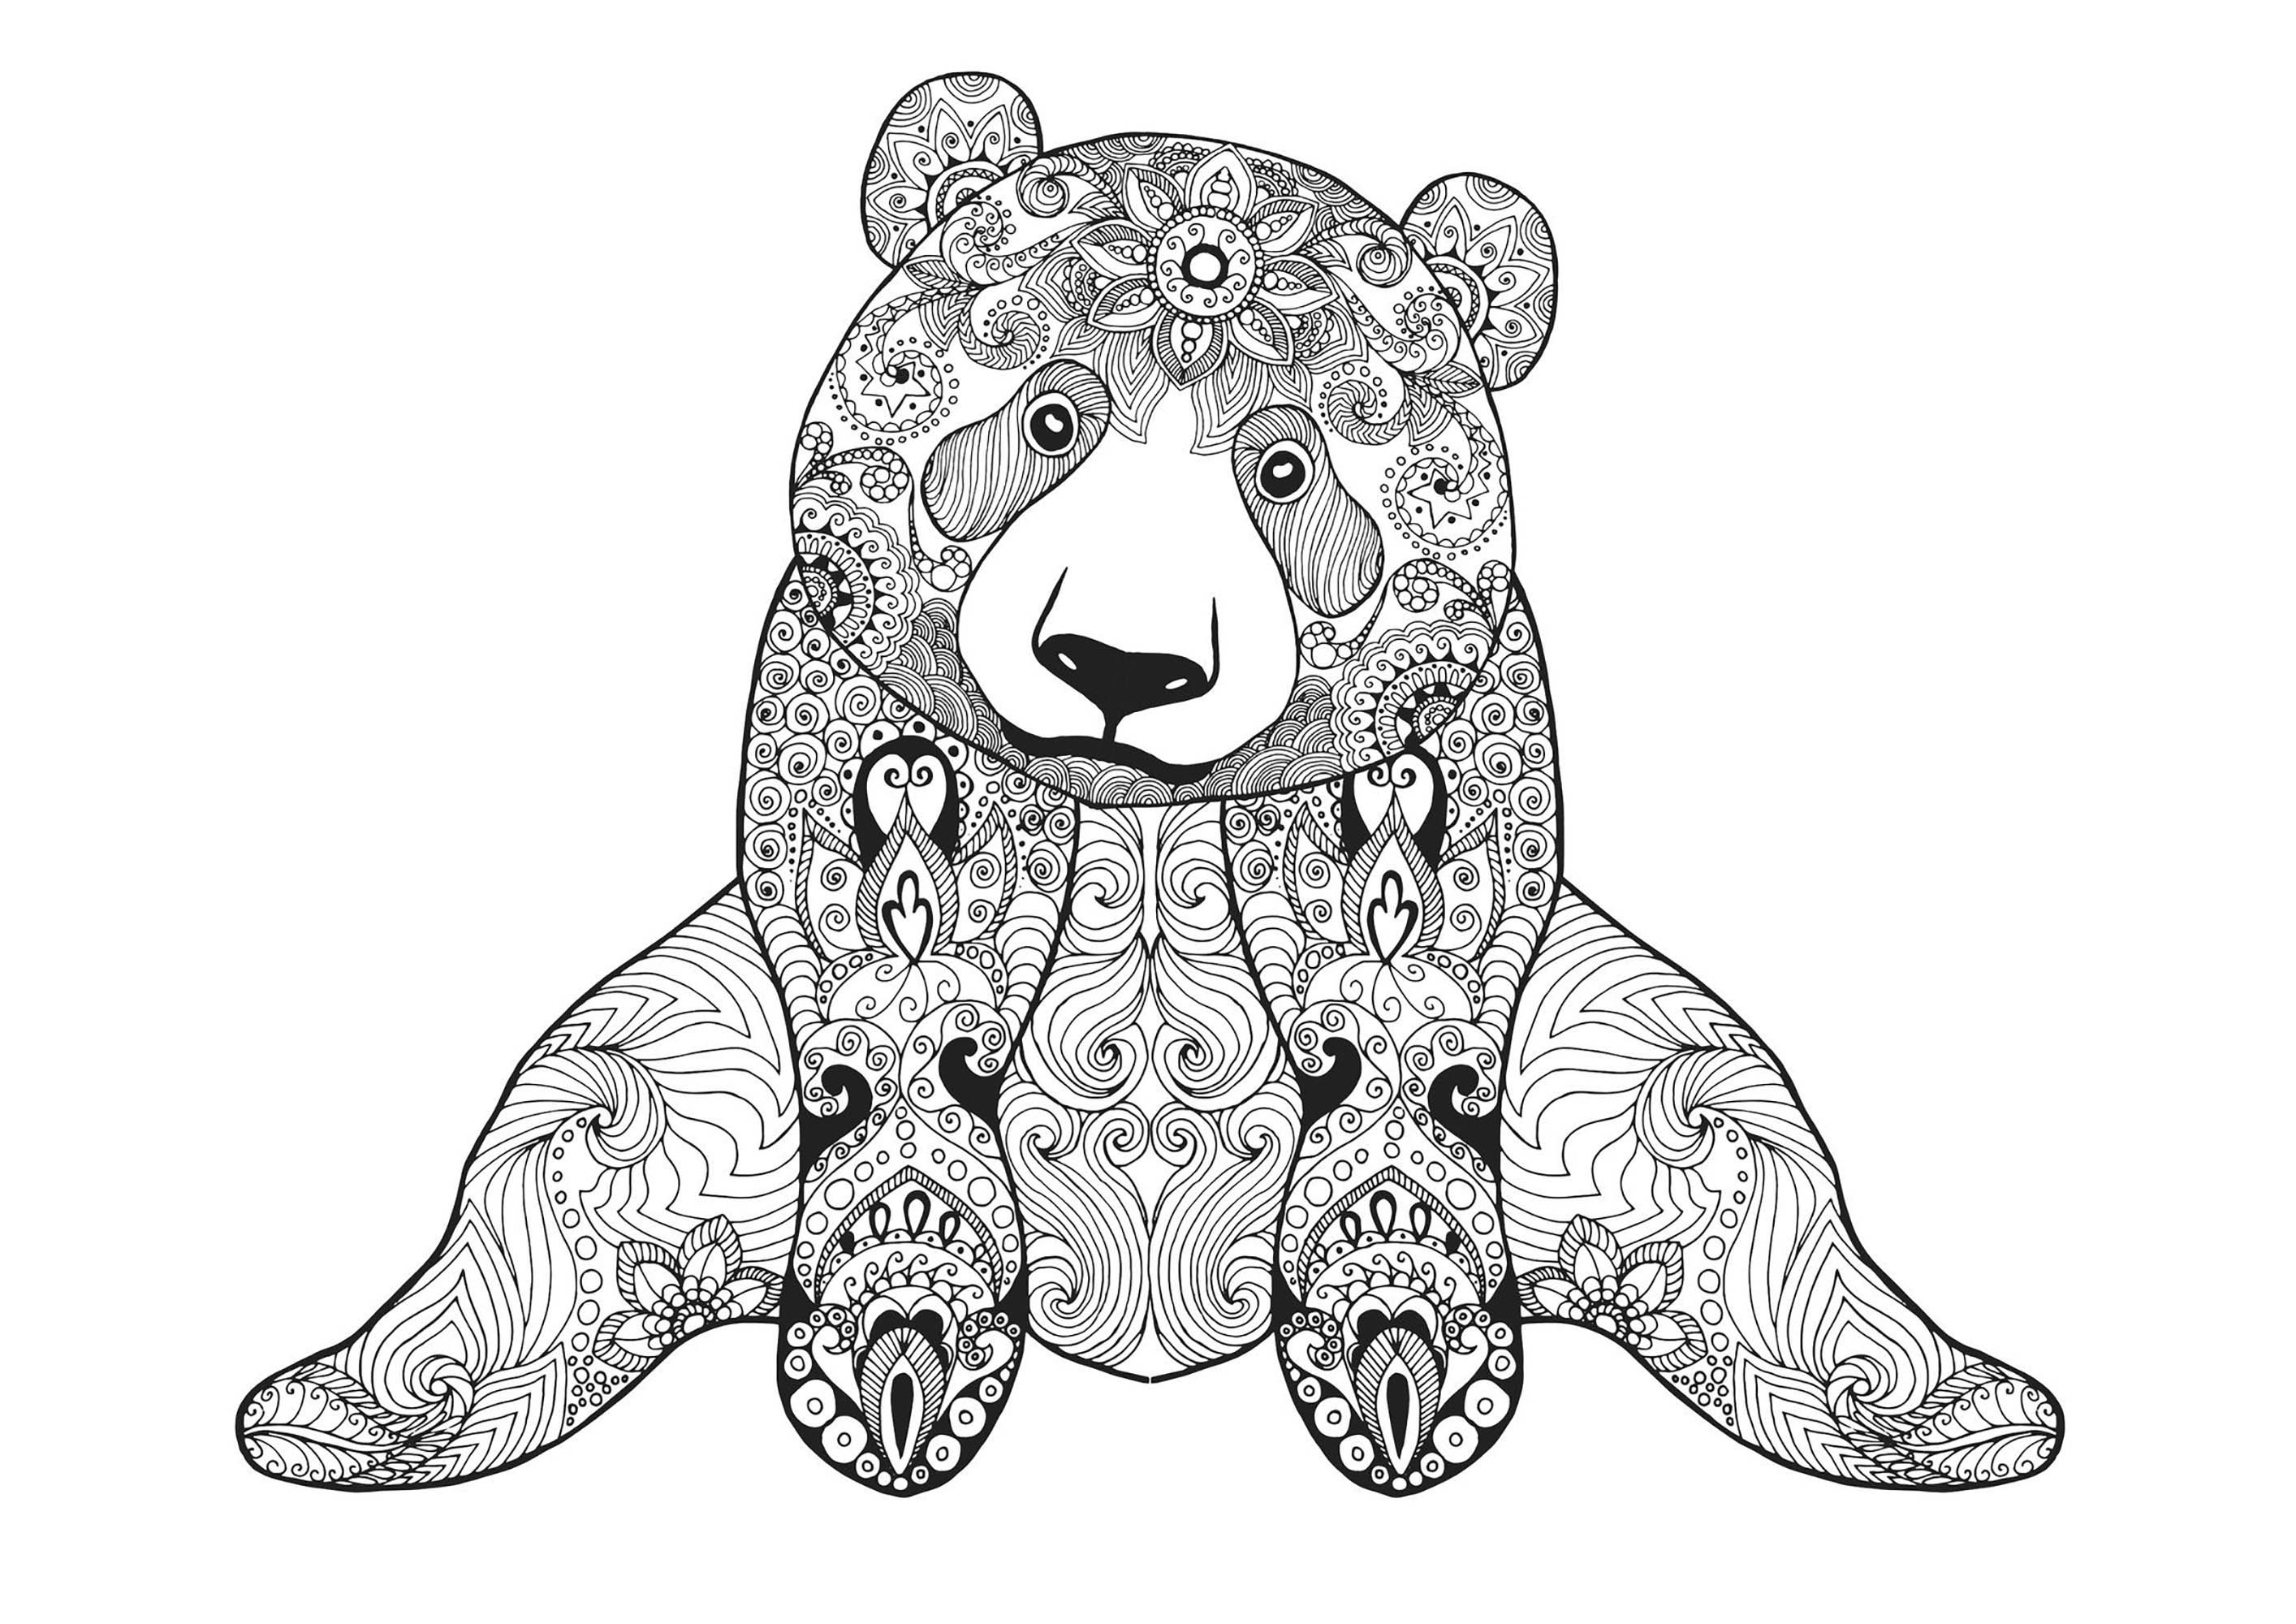 This bear is sitting and is waiting to be colored .., Source : 123rf   Artist : Alina Safiullina #NOLINK